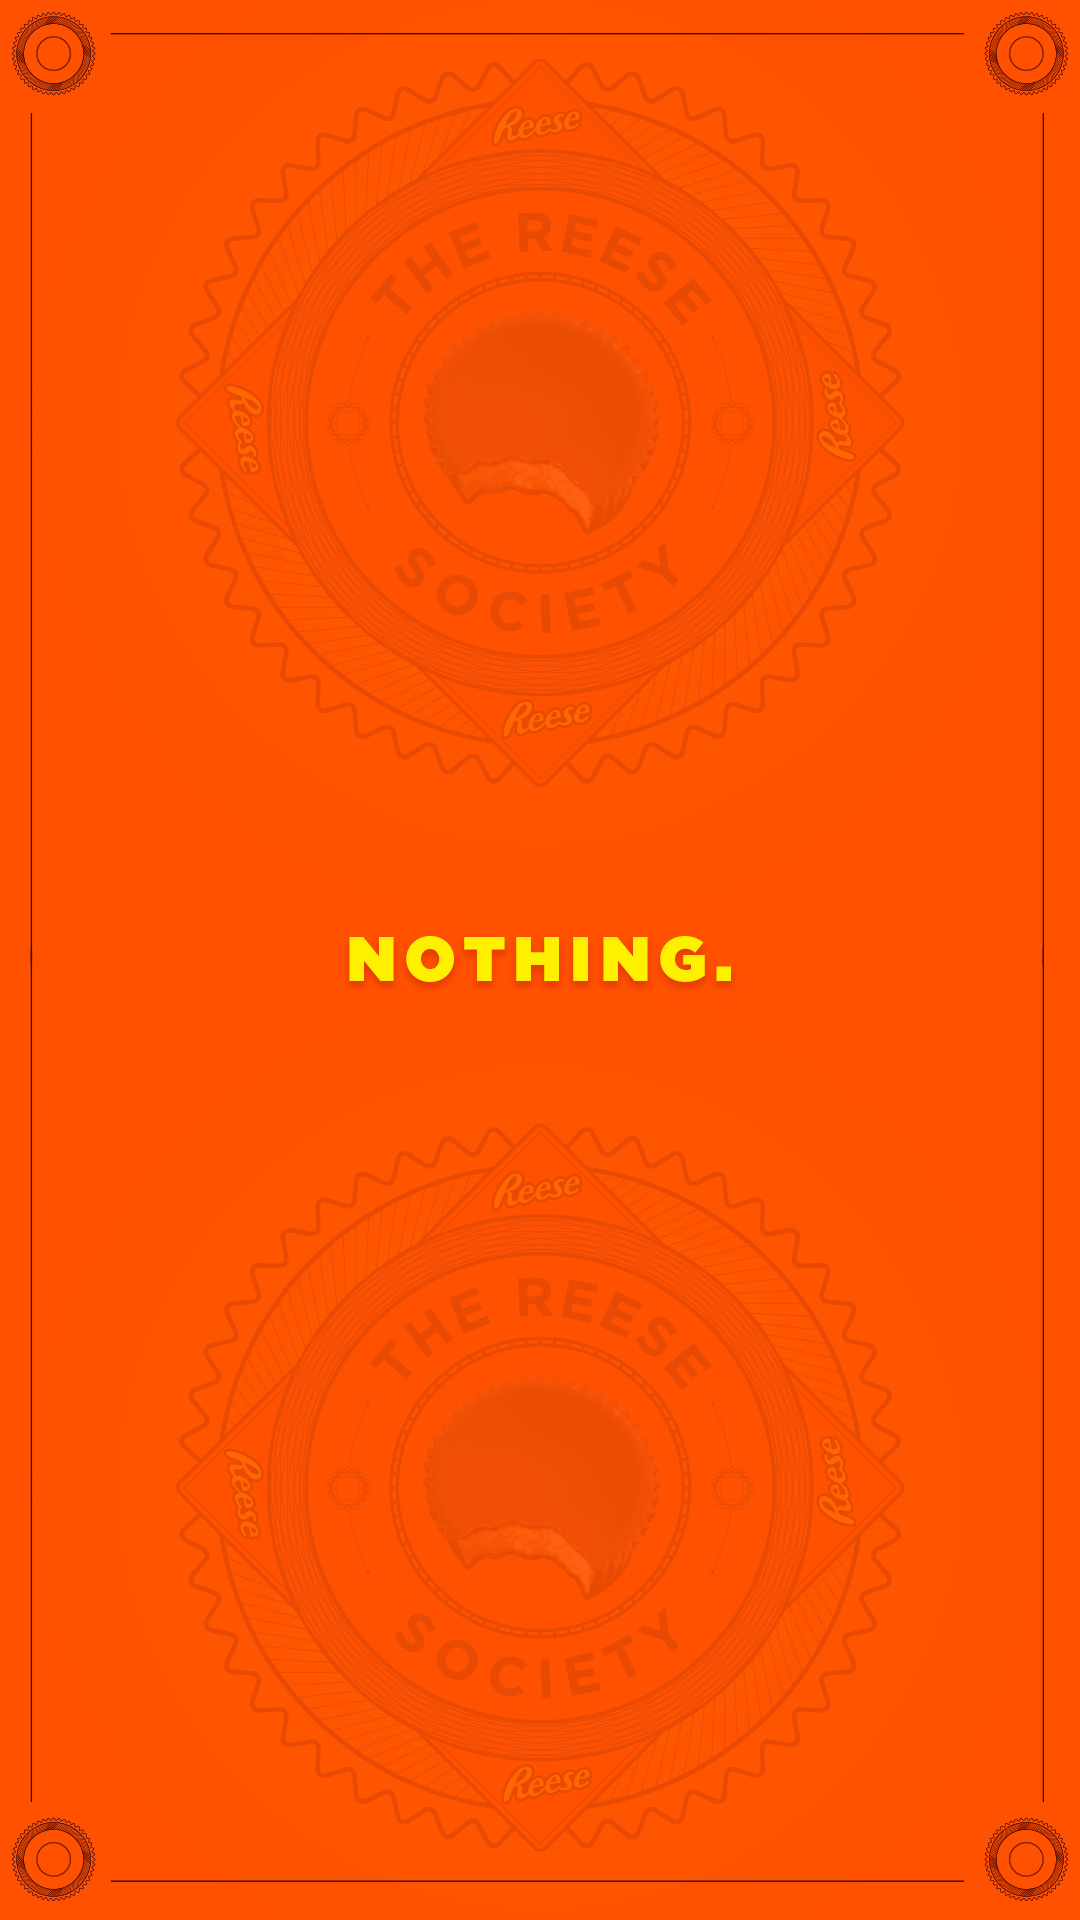 Reese-Society-IG_0028_Nothing.png